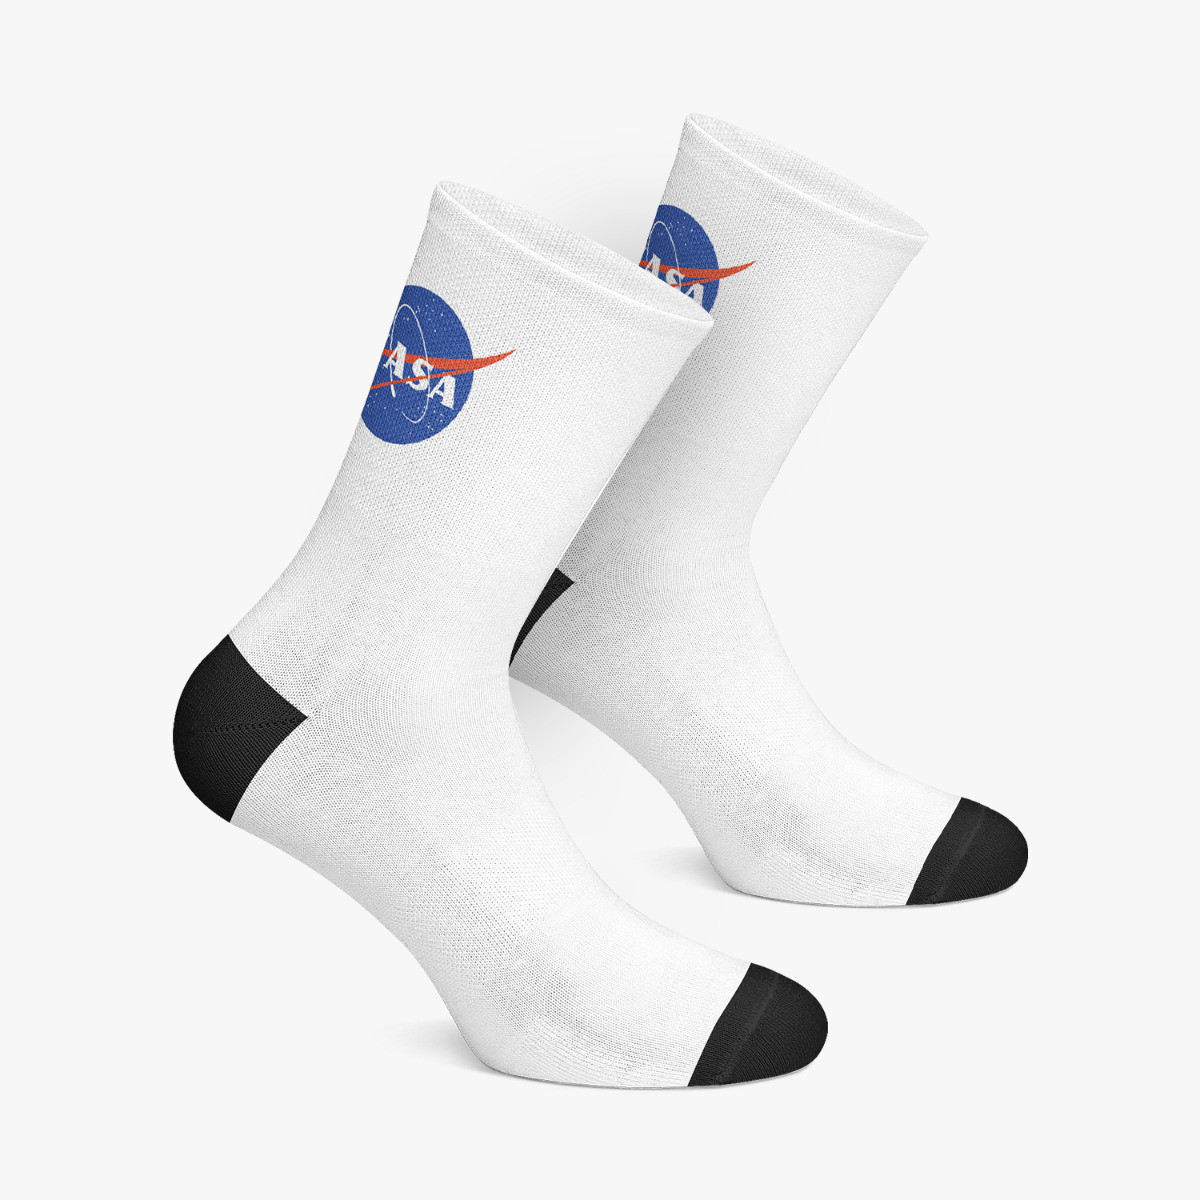 CHAUSSETTE SCICON X SPACE AGENCY 01